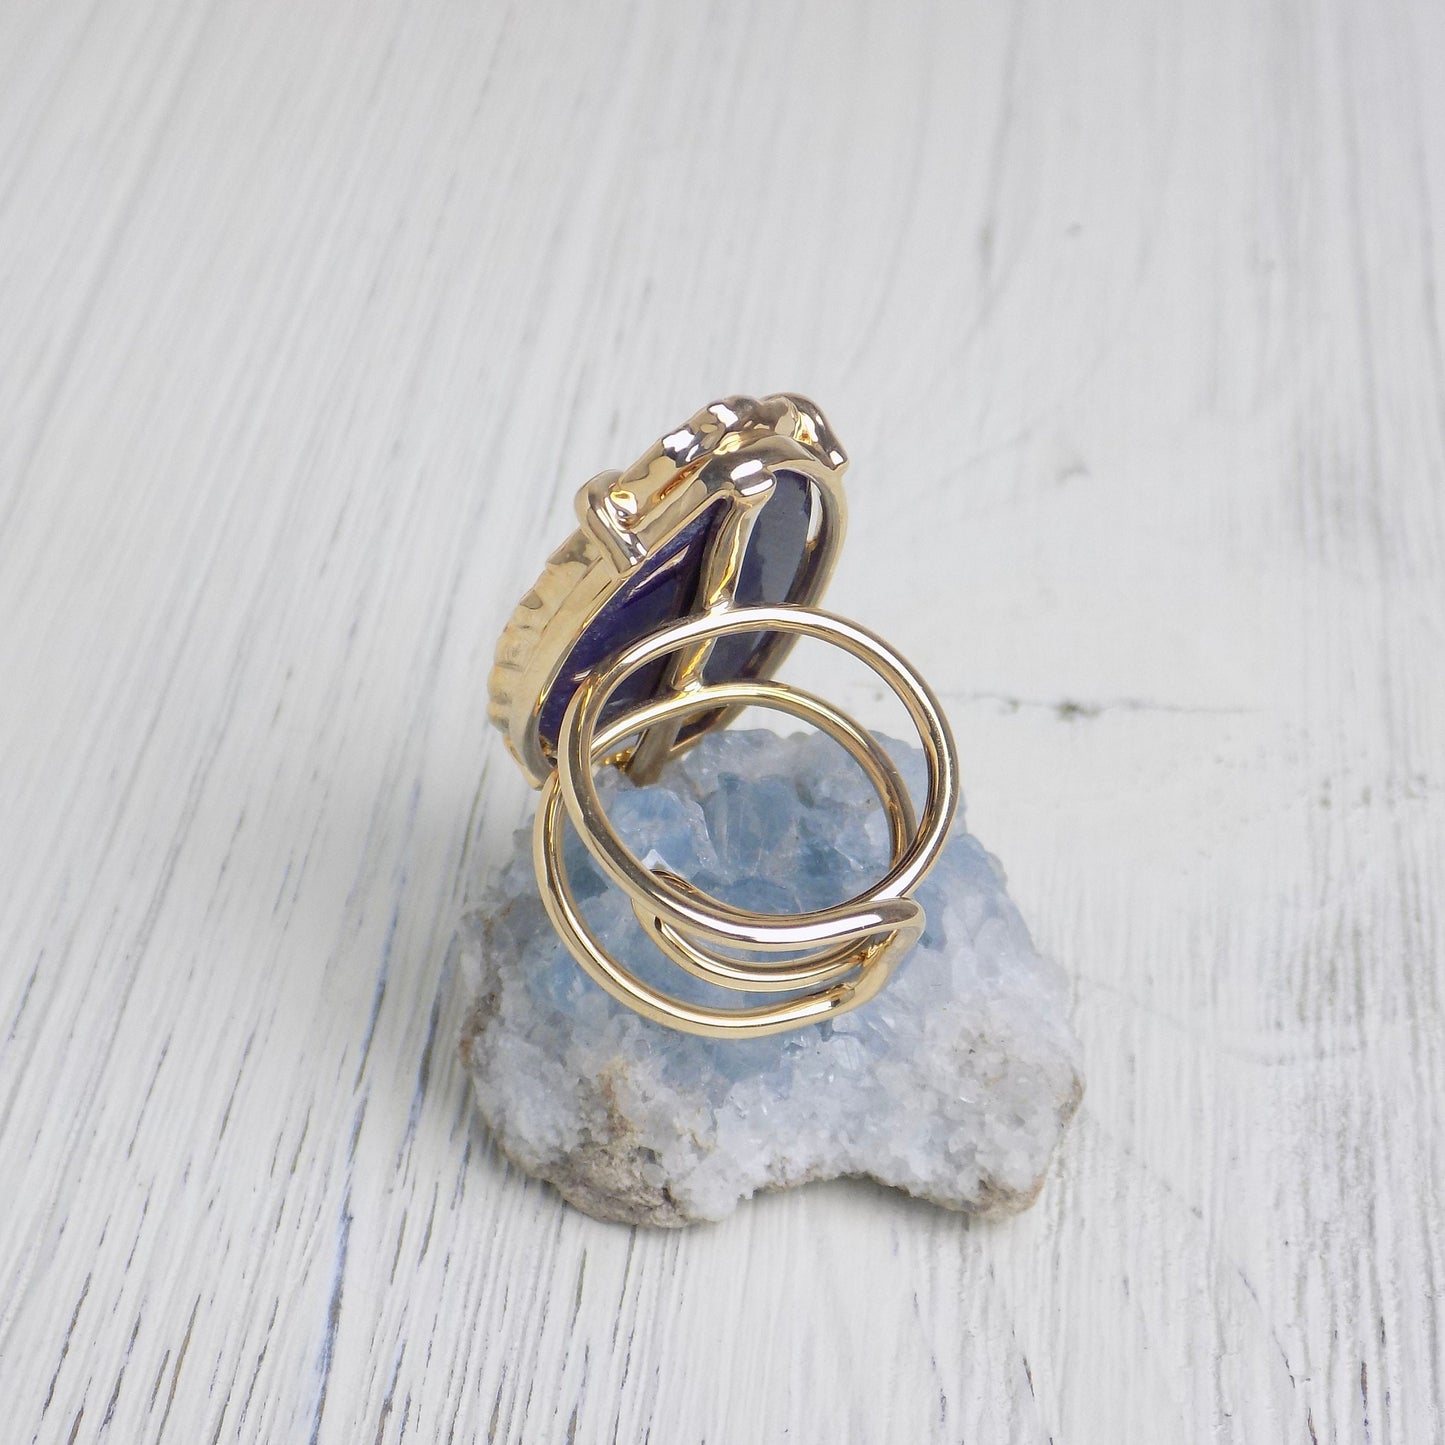 Purple Statement Gemstone Ring Gold Adjustable, Agate Slice Rings, Gift For Mom, G14-150